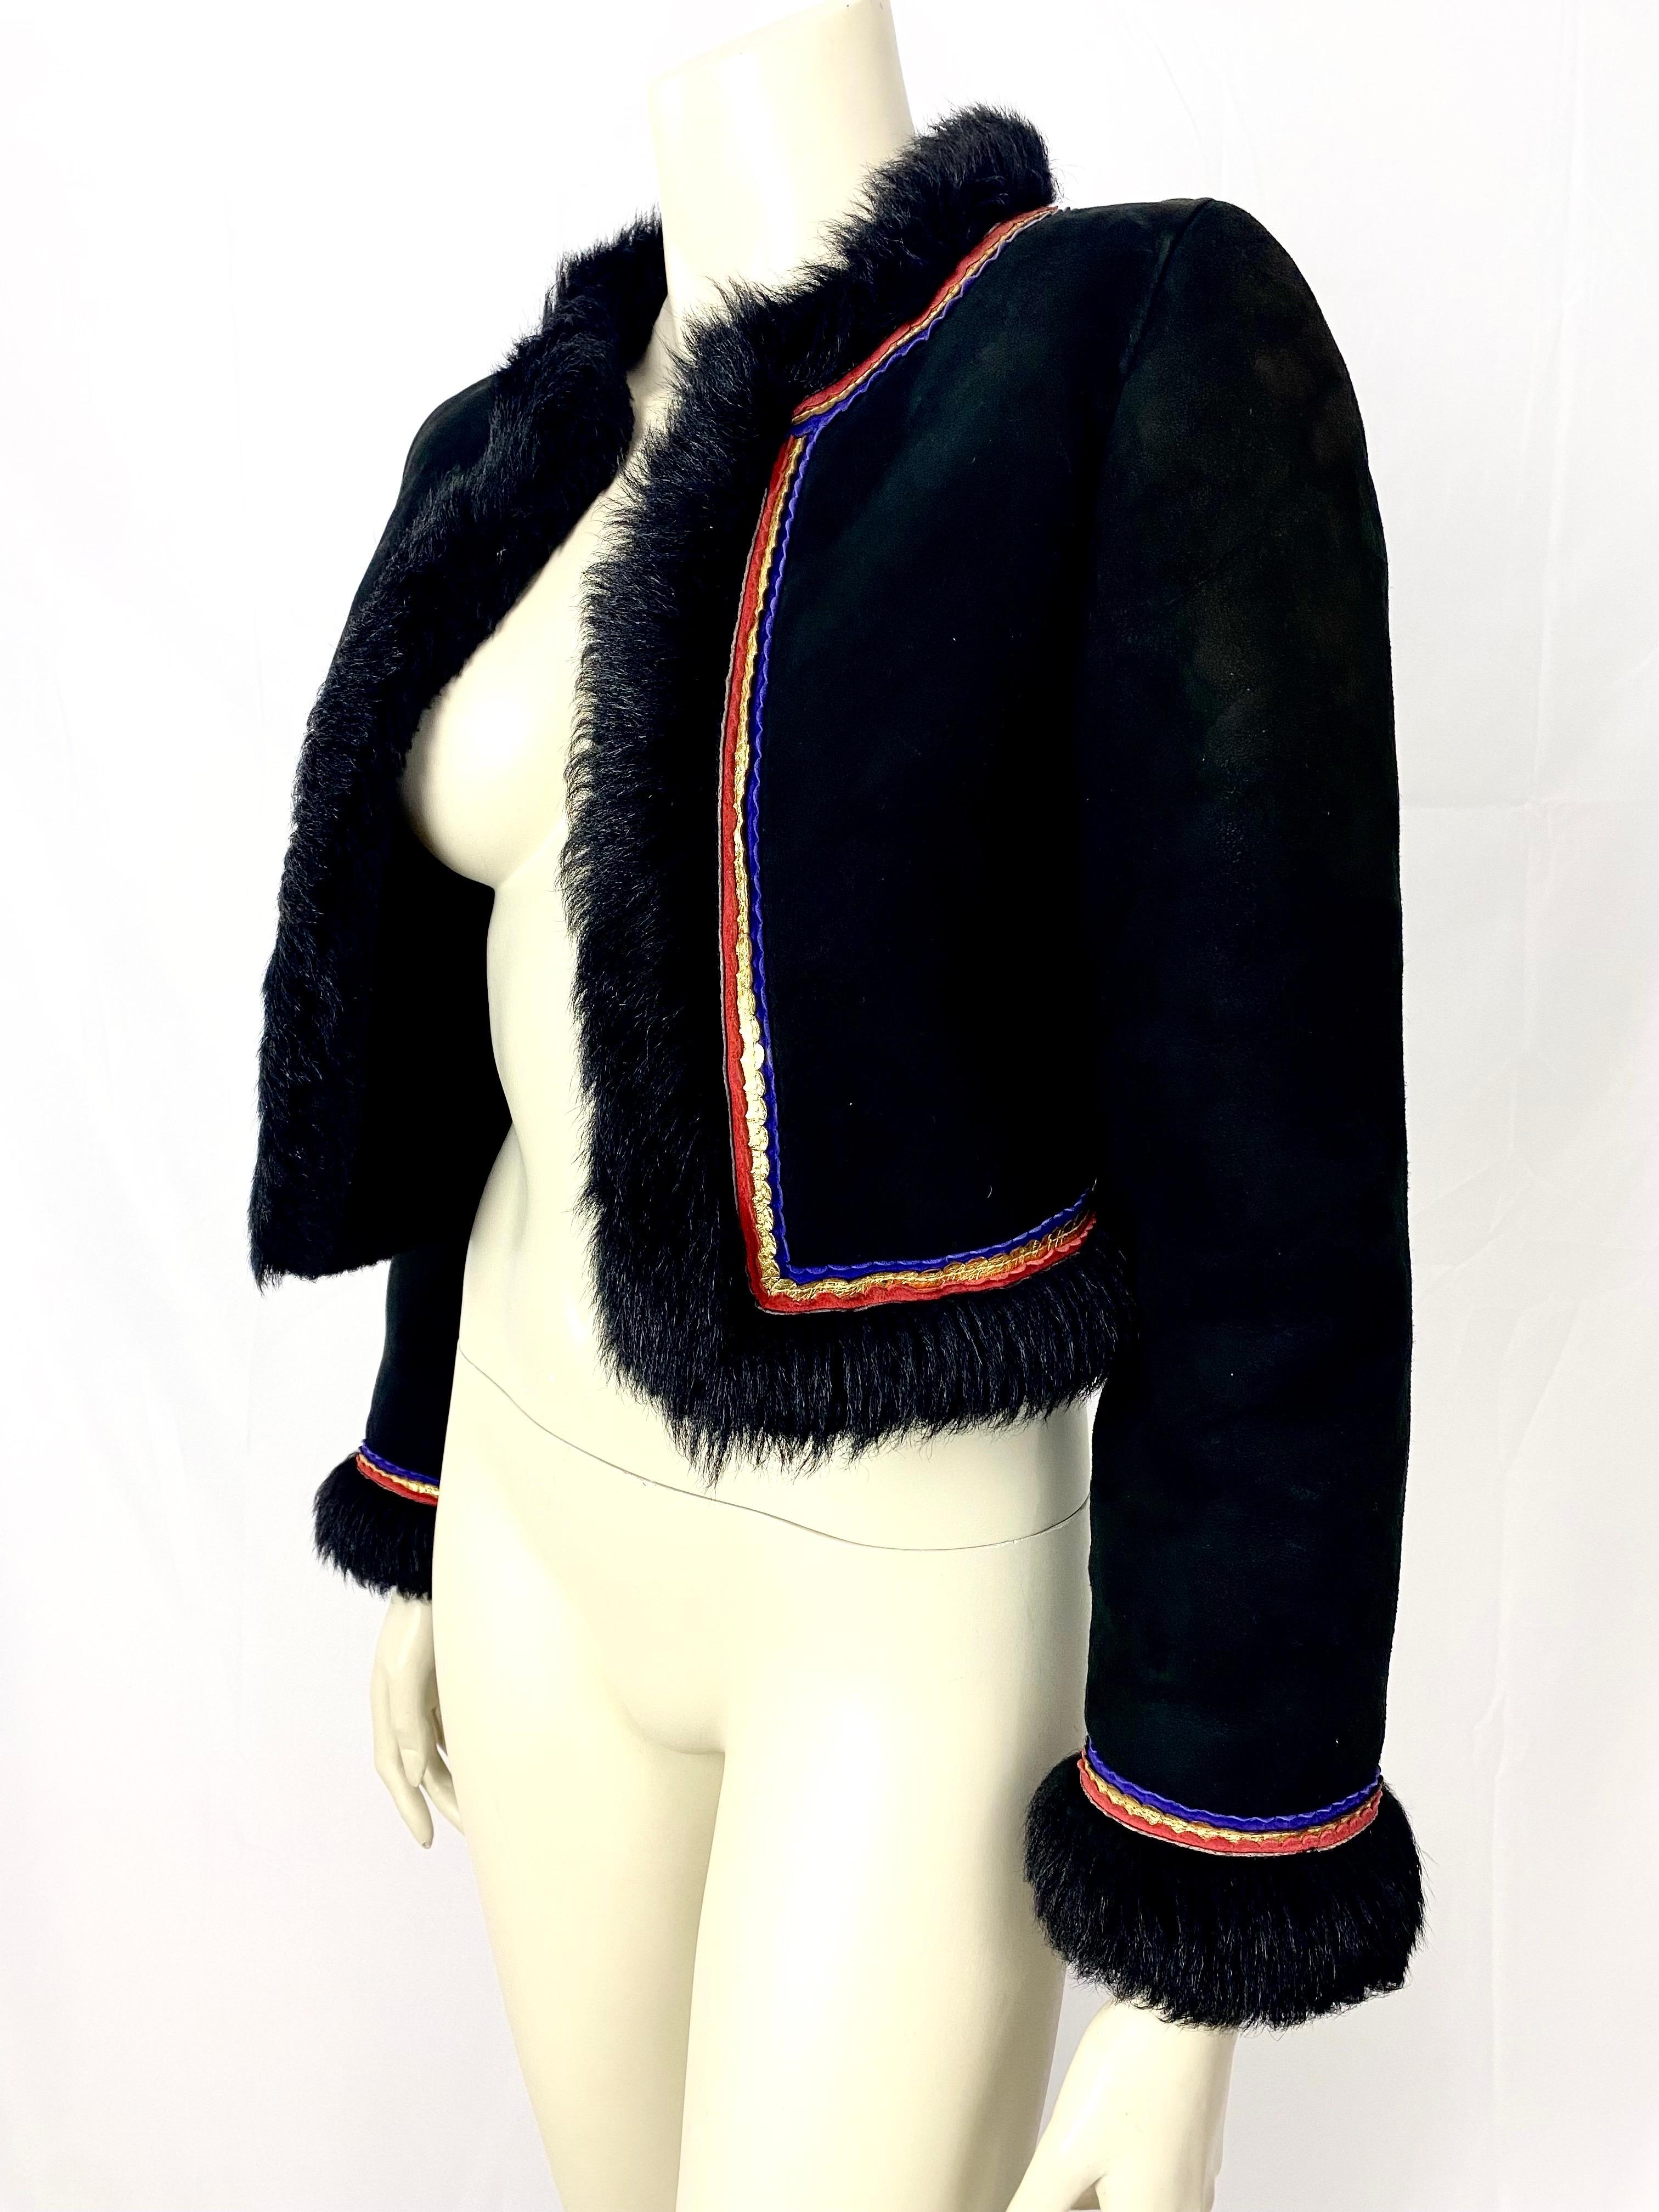 Short vintage jacket by Valentino in black shearling with details of red, gold and purple leather braids.
The jacket is very warm and the skin supple.
Round neck, indicated size 32, refer to measurements
shoulders 40cm
Chest width 47cm
size